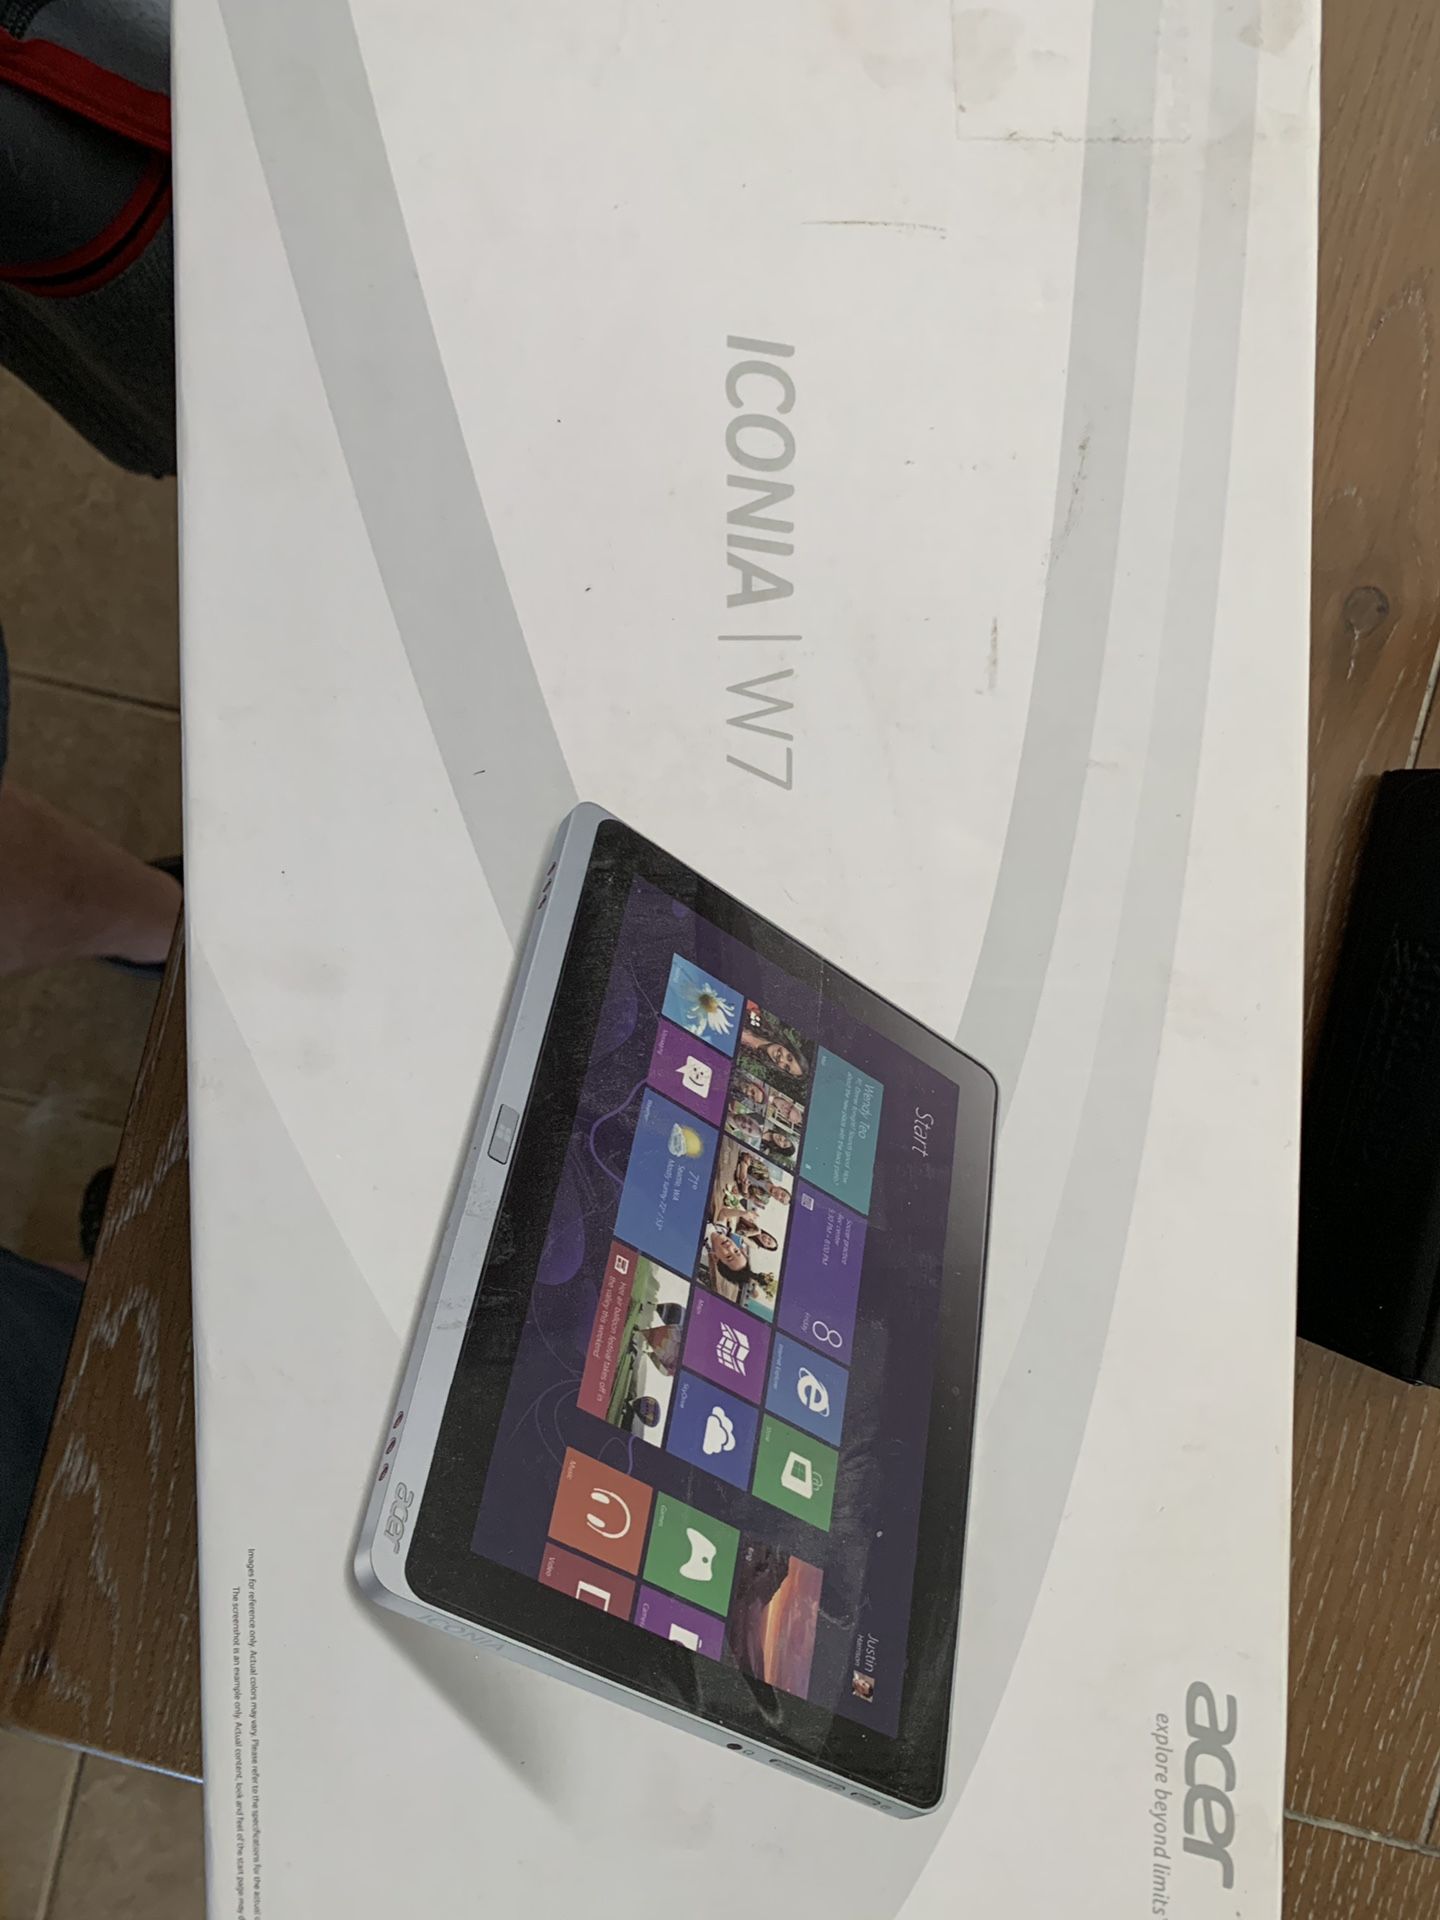 Acer Iconia W7 tablet